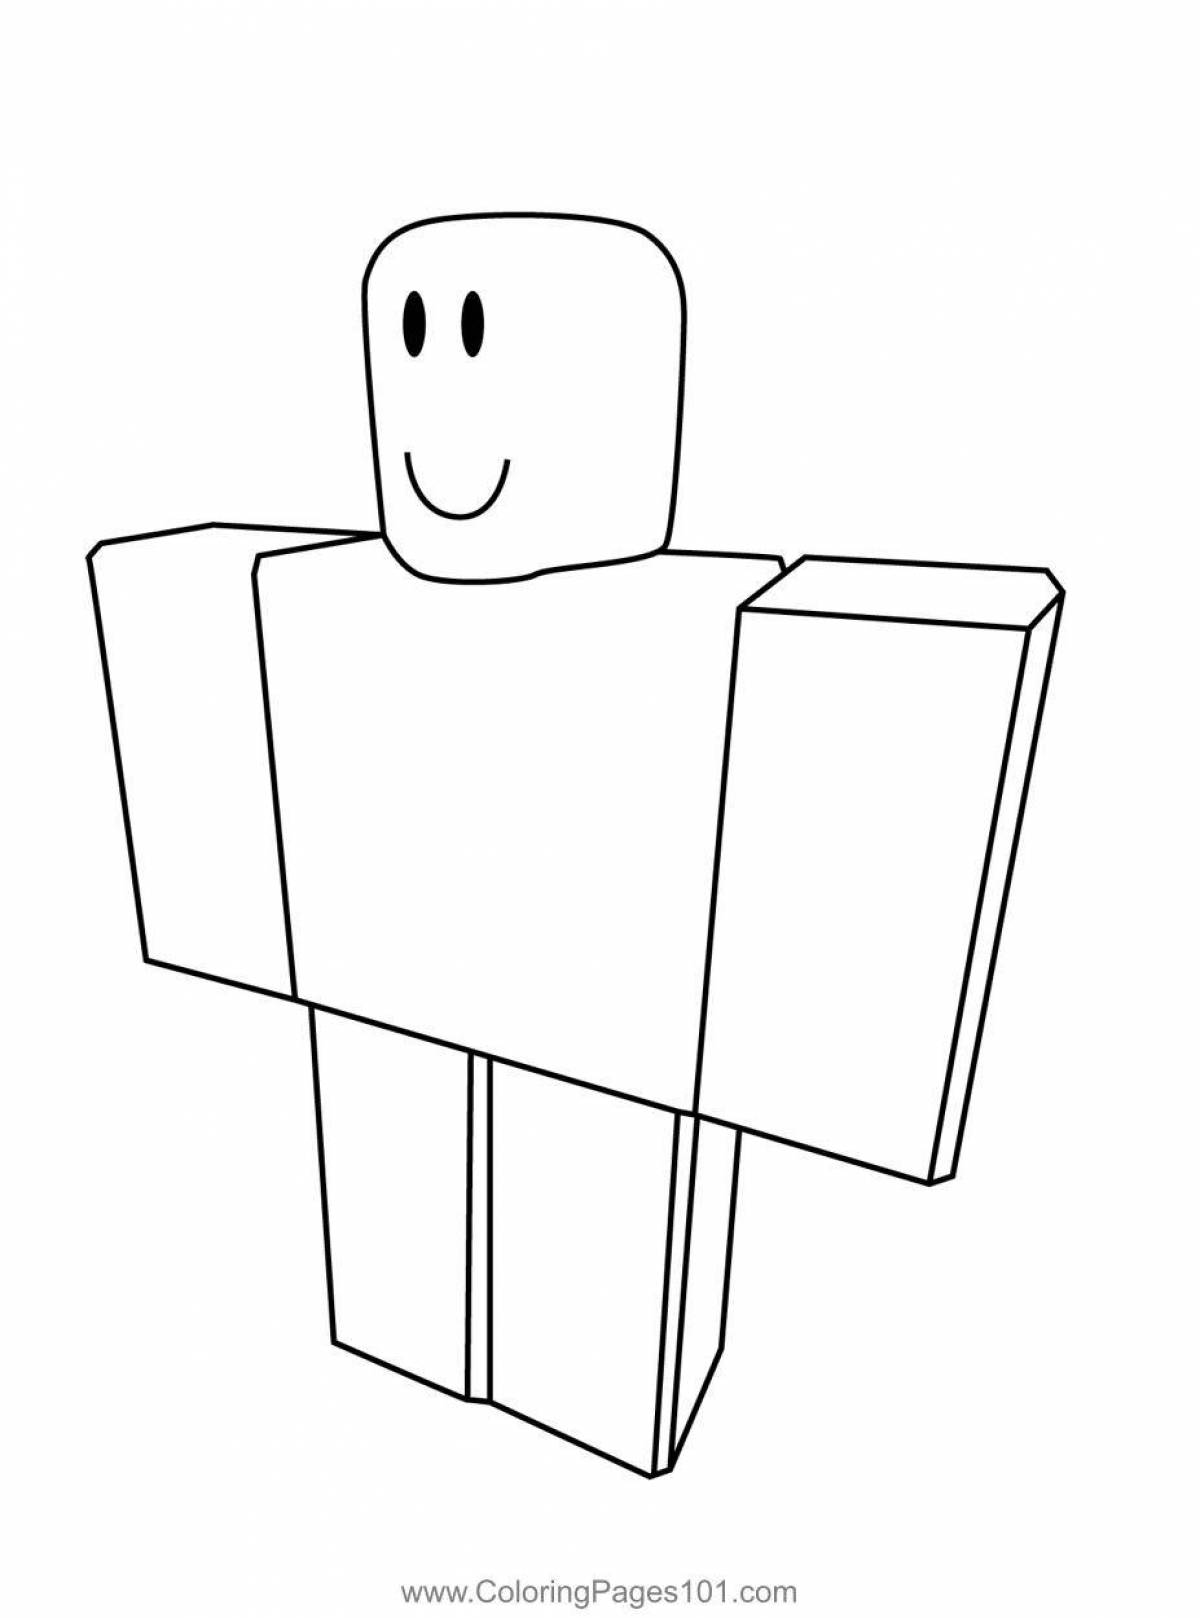 Roblox nubik coloring pages with crazy color